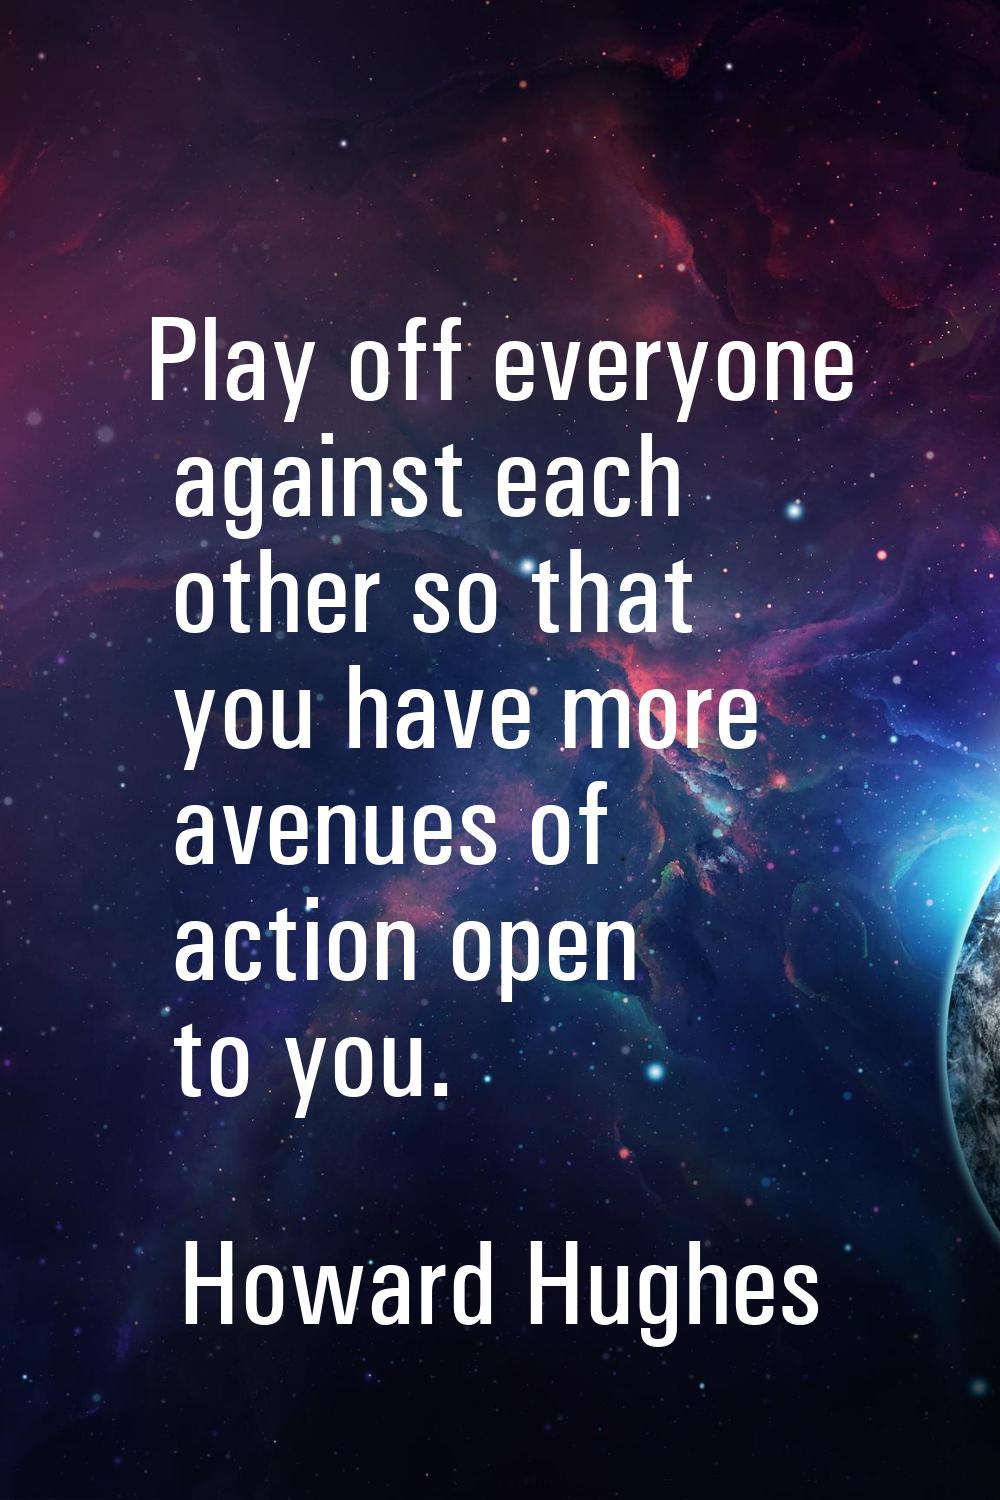 Play off everyone against each other so that you have more avenues of action open to you.